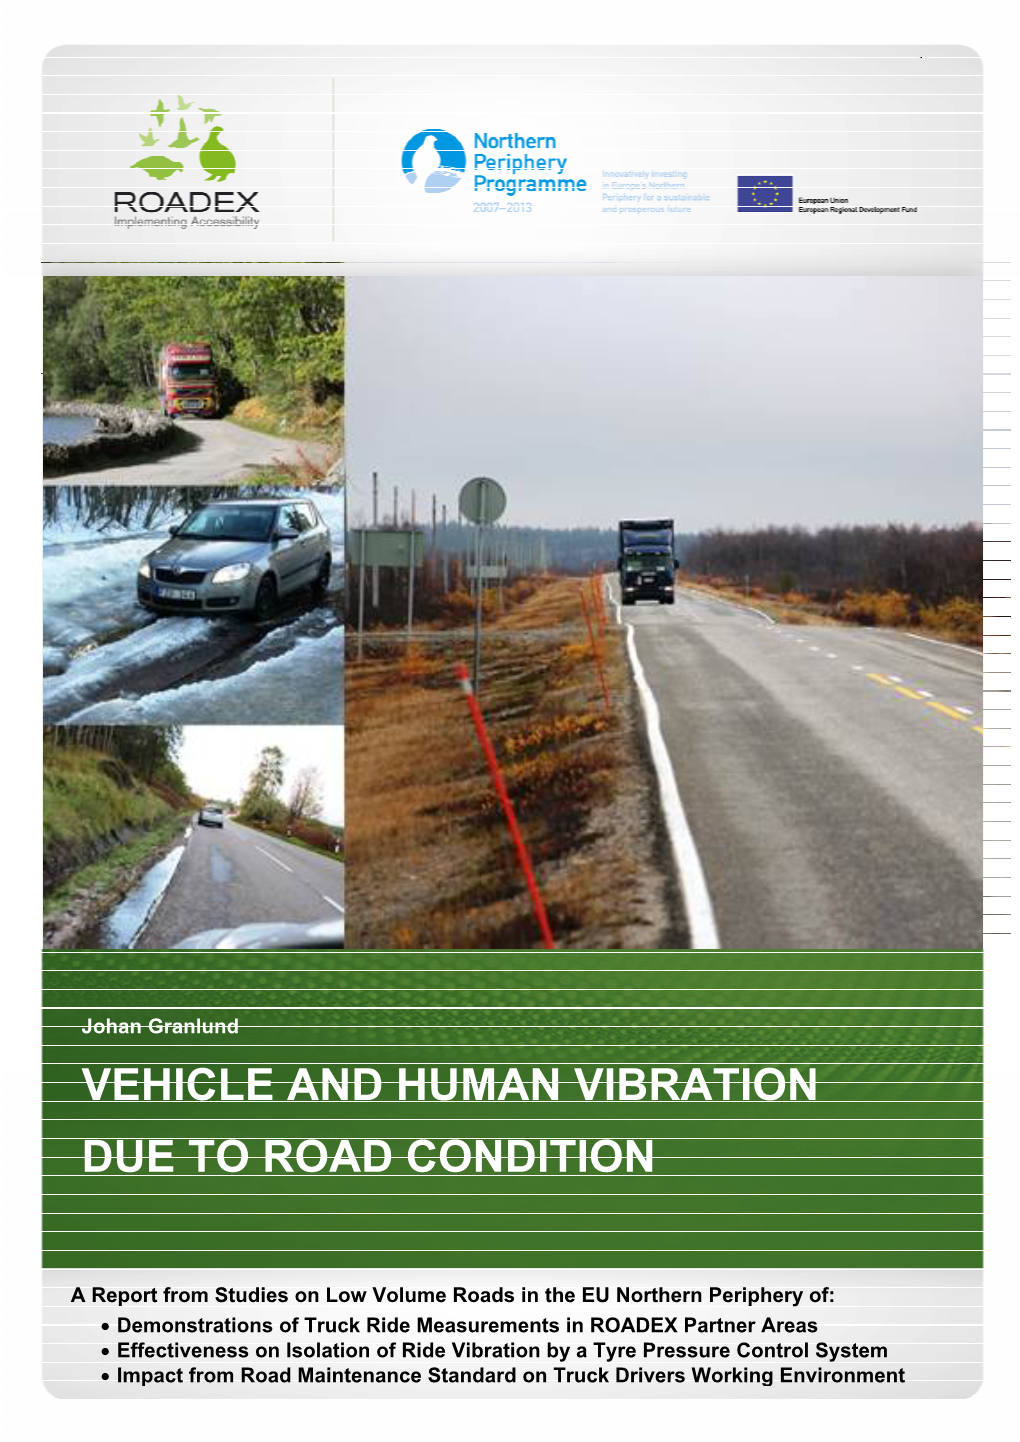 Vehicle and Human Vibration Due to Road Condition (2012)